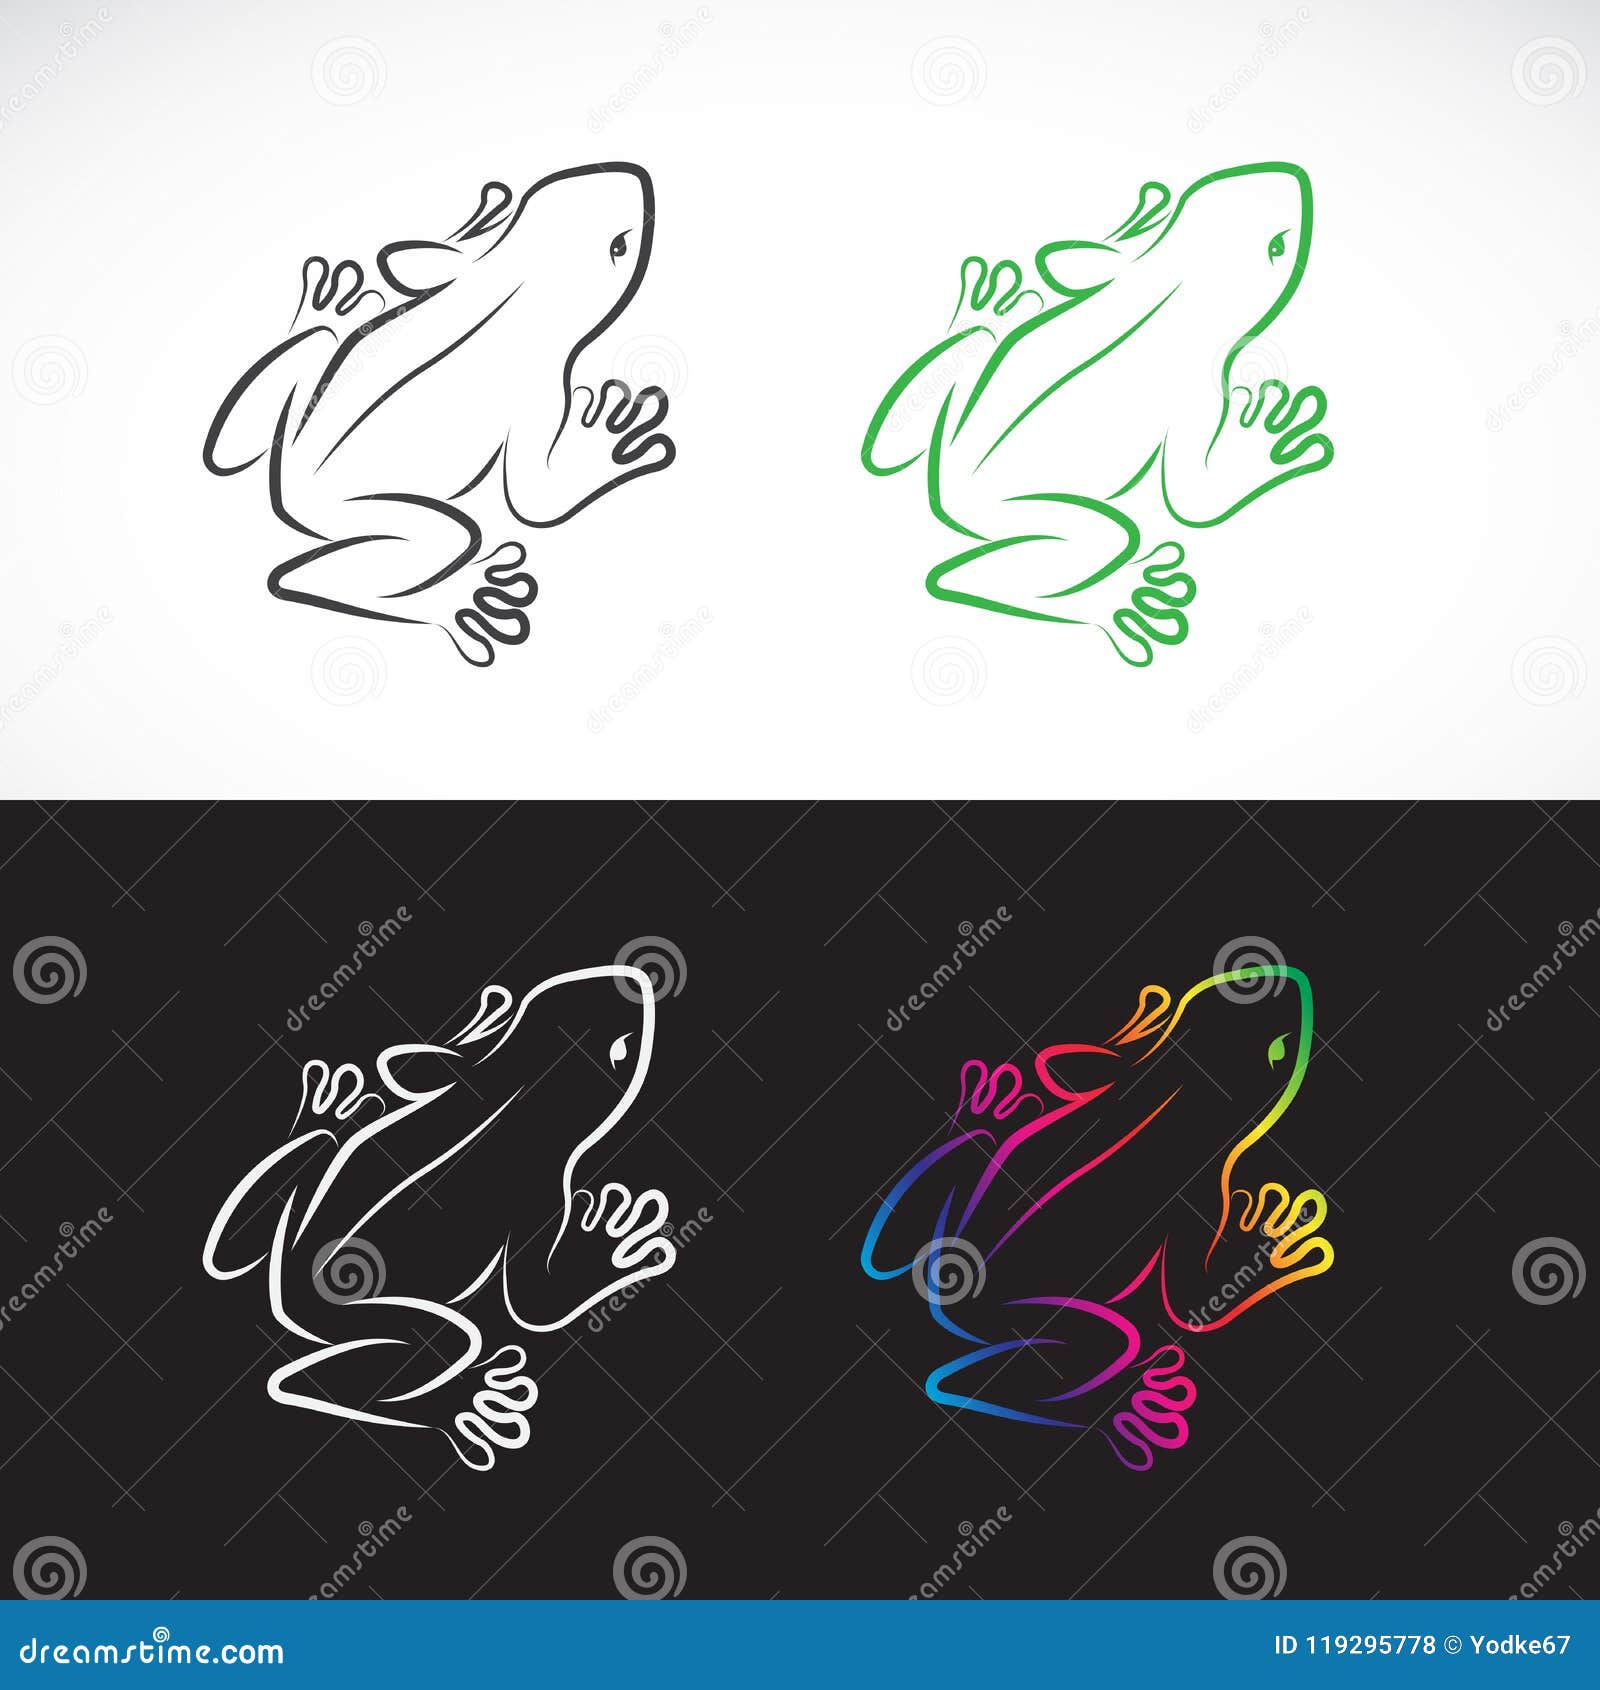  of frogs  on white background and black background.